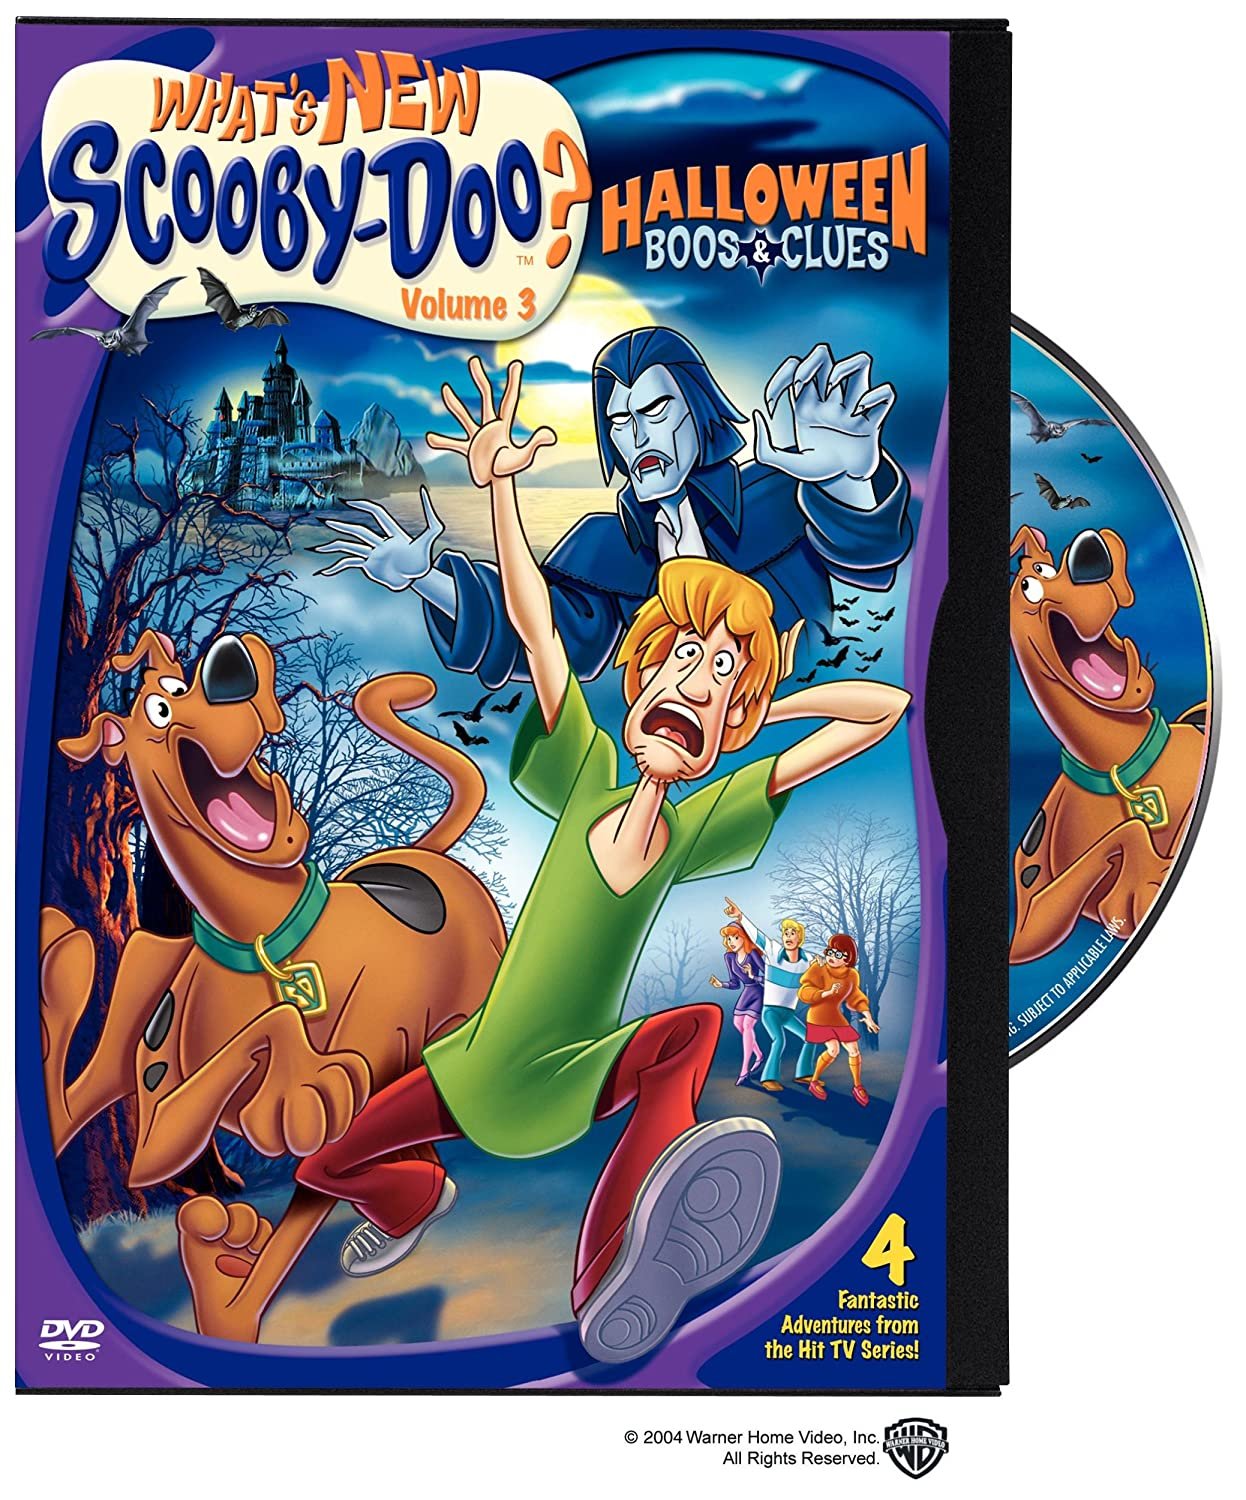 What's New Scooby-Doo, Vol. 3 - Halloween Boos and Clues (DVD)